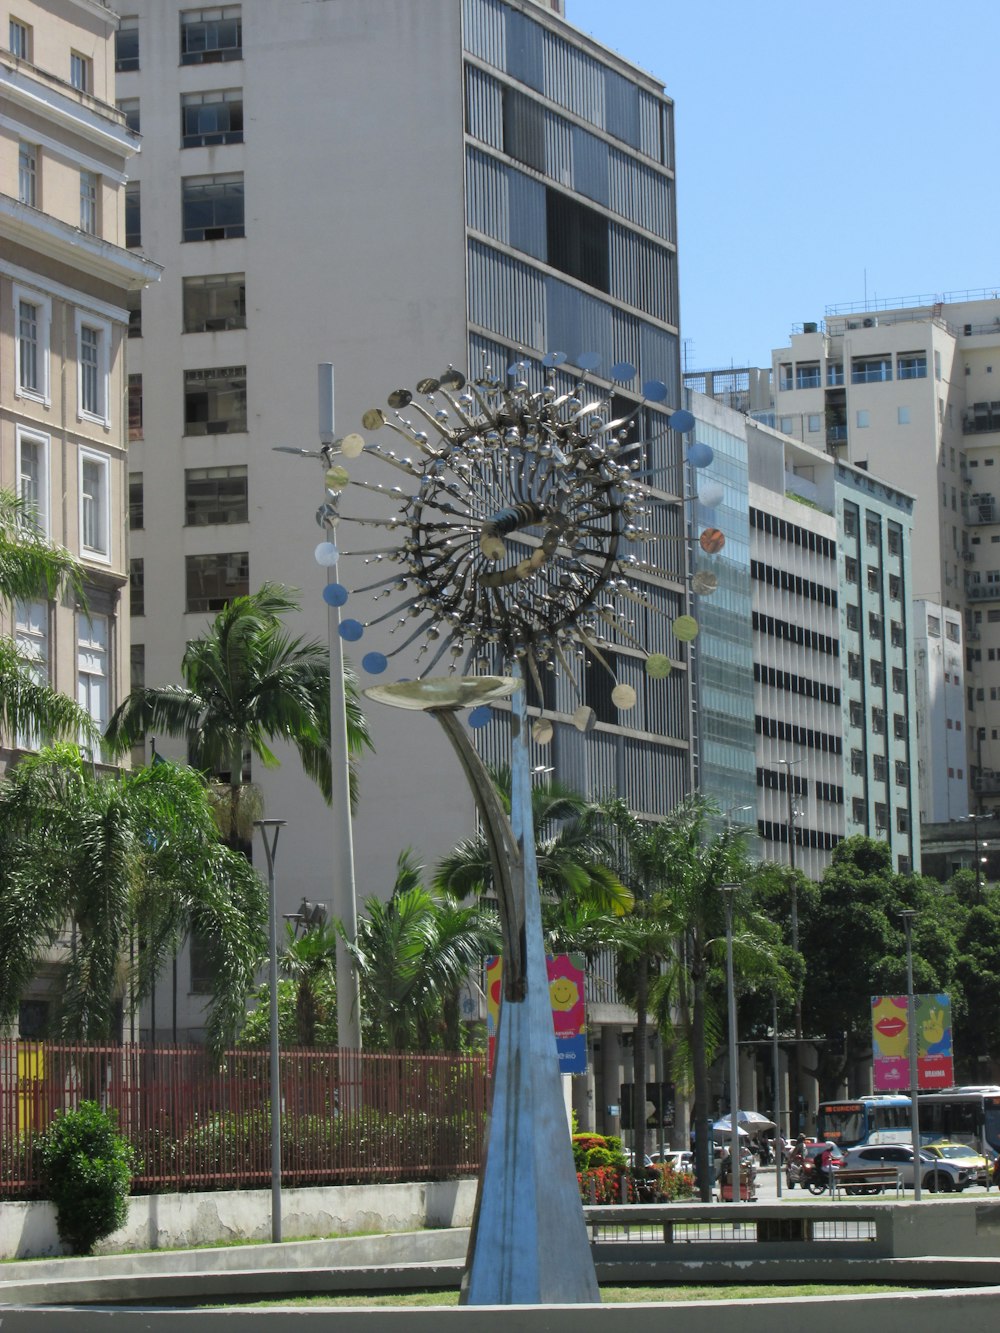 a large metal sculpture in the middle of a city